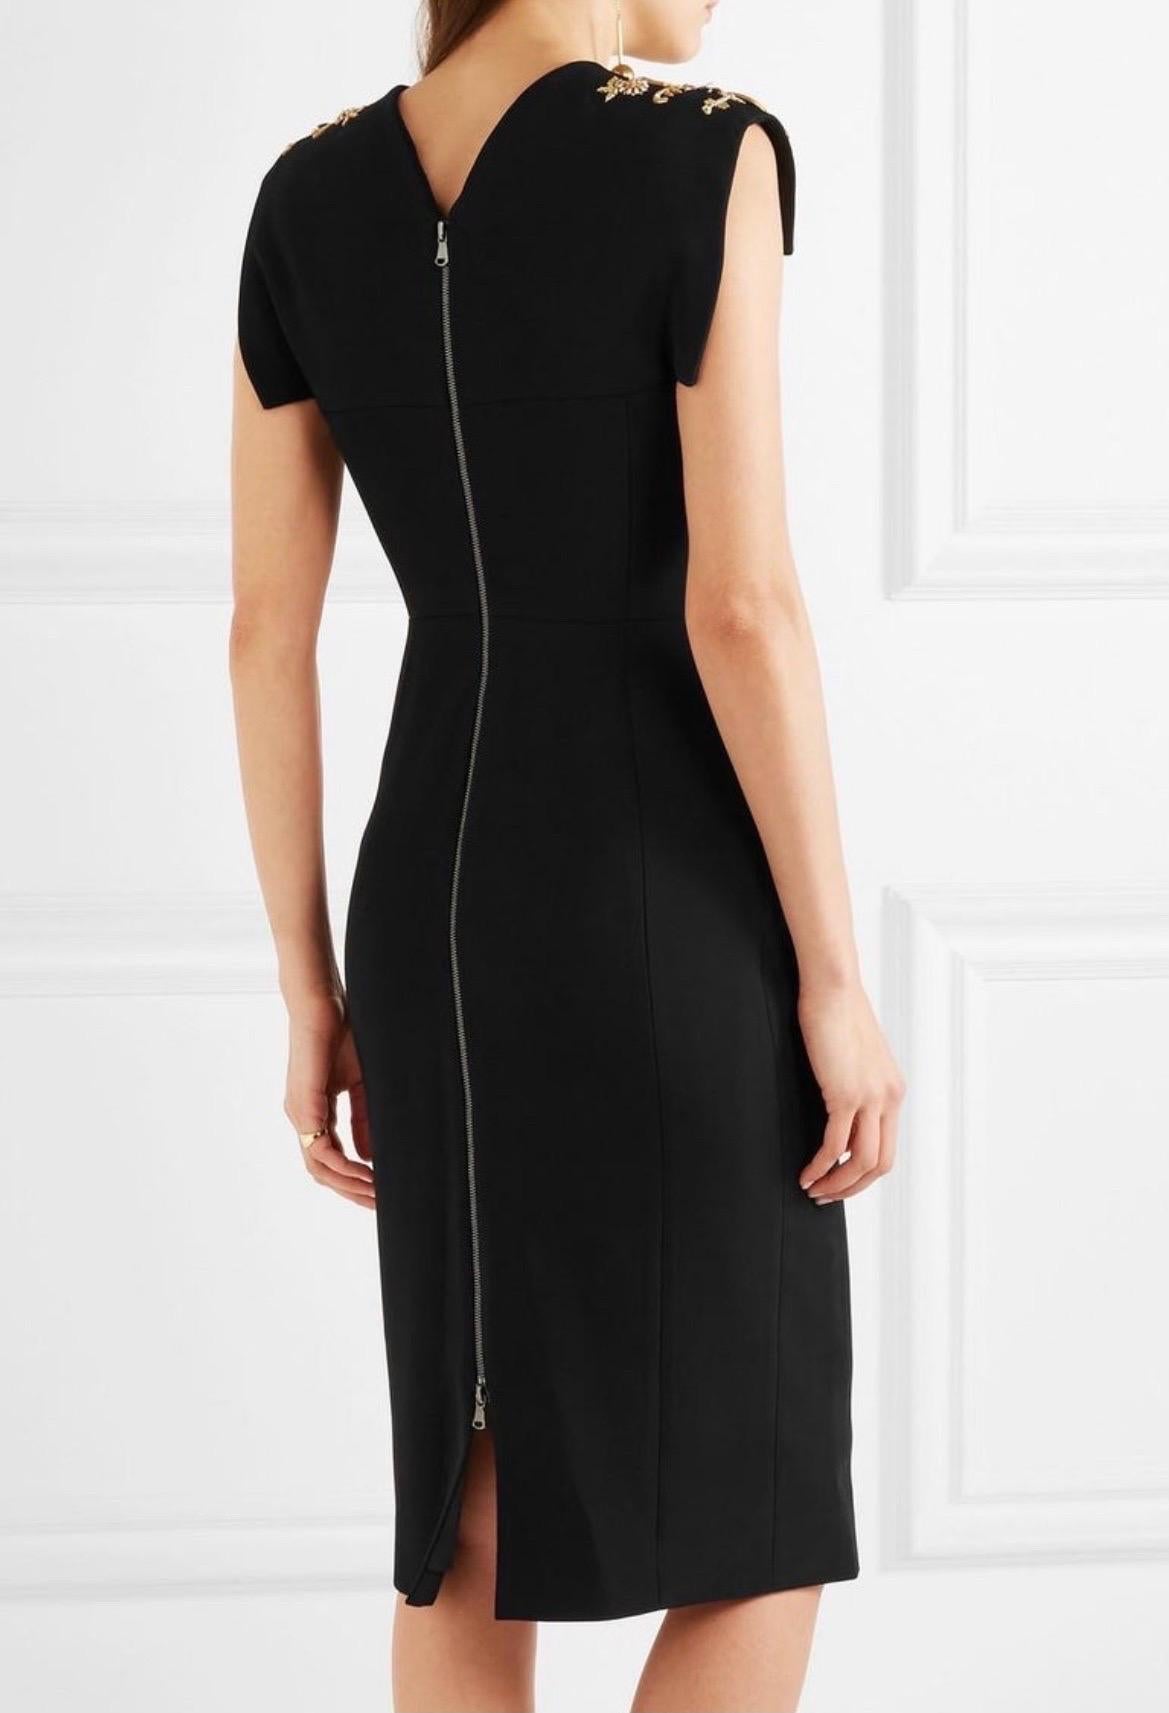 New Antonio Berardi Mirror and Pearl Embroidery black stretch dress 42-6 In New Condition For Sale In Montgomery, TX